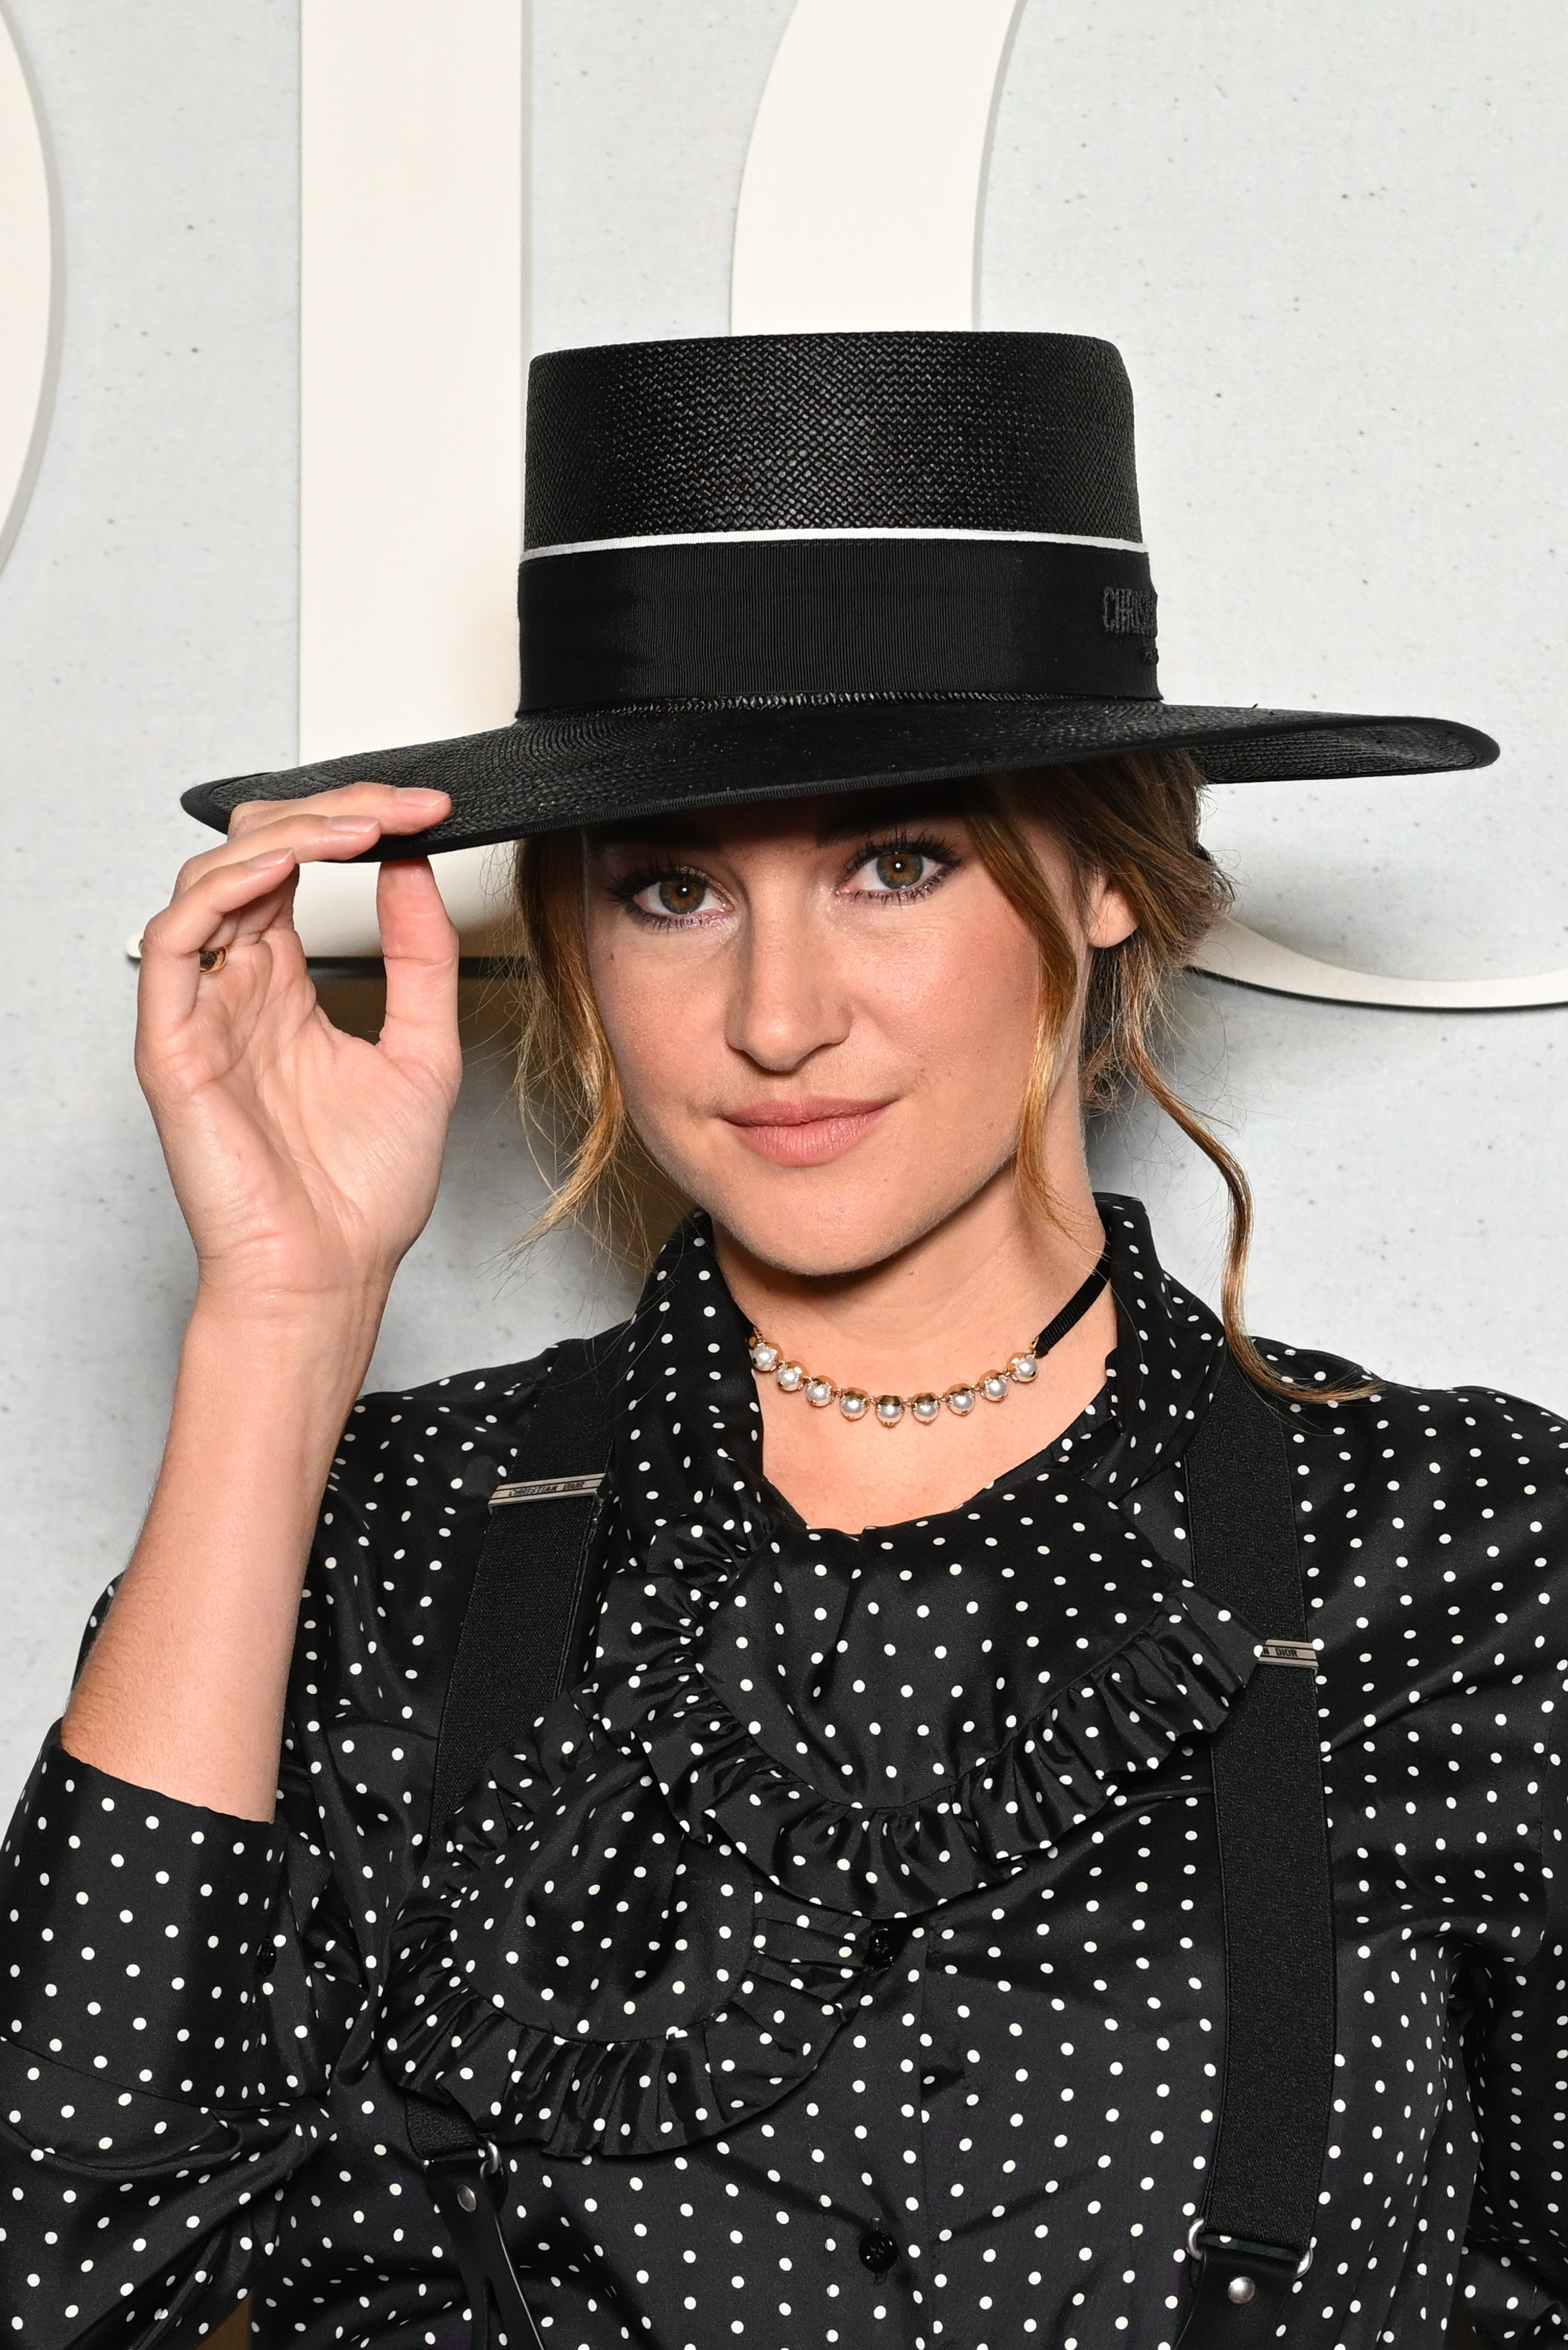 Shailene tipping her wide-brimmed hat as he poses for a photo. Shailene is also wearing a polka dot blouse and suspenders